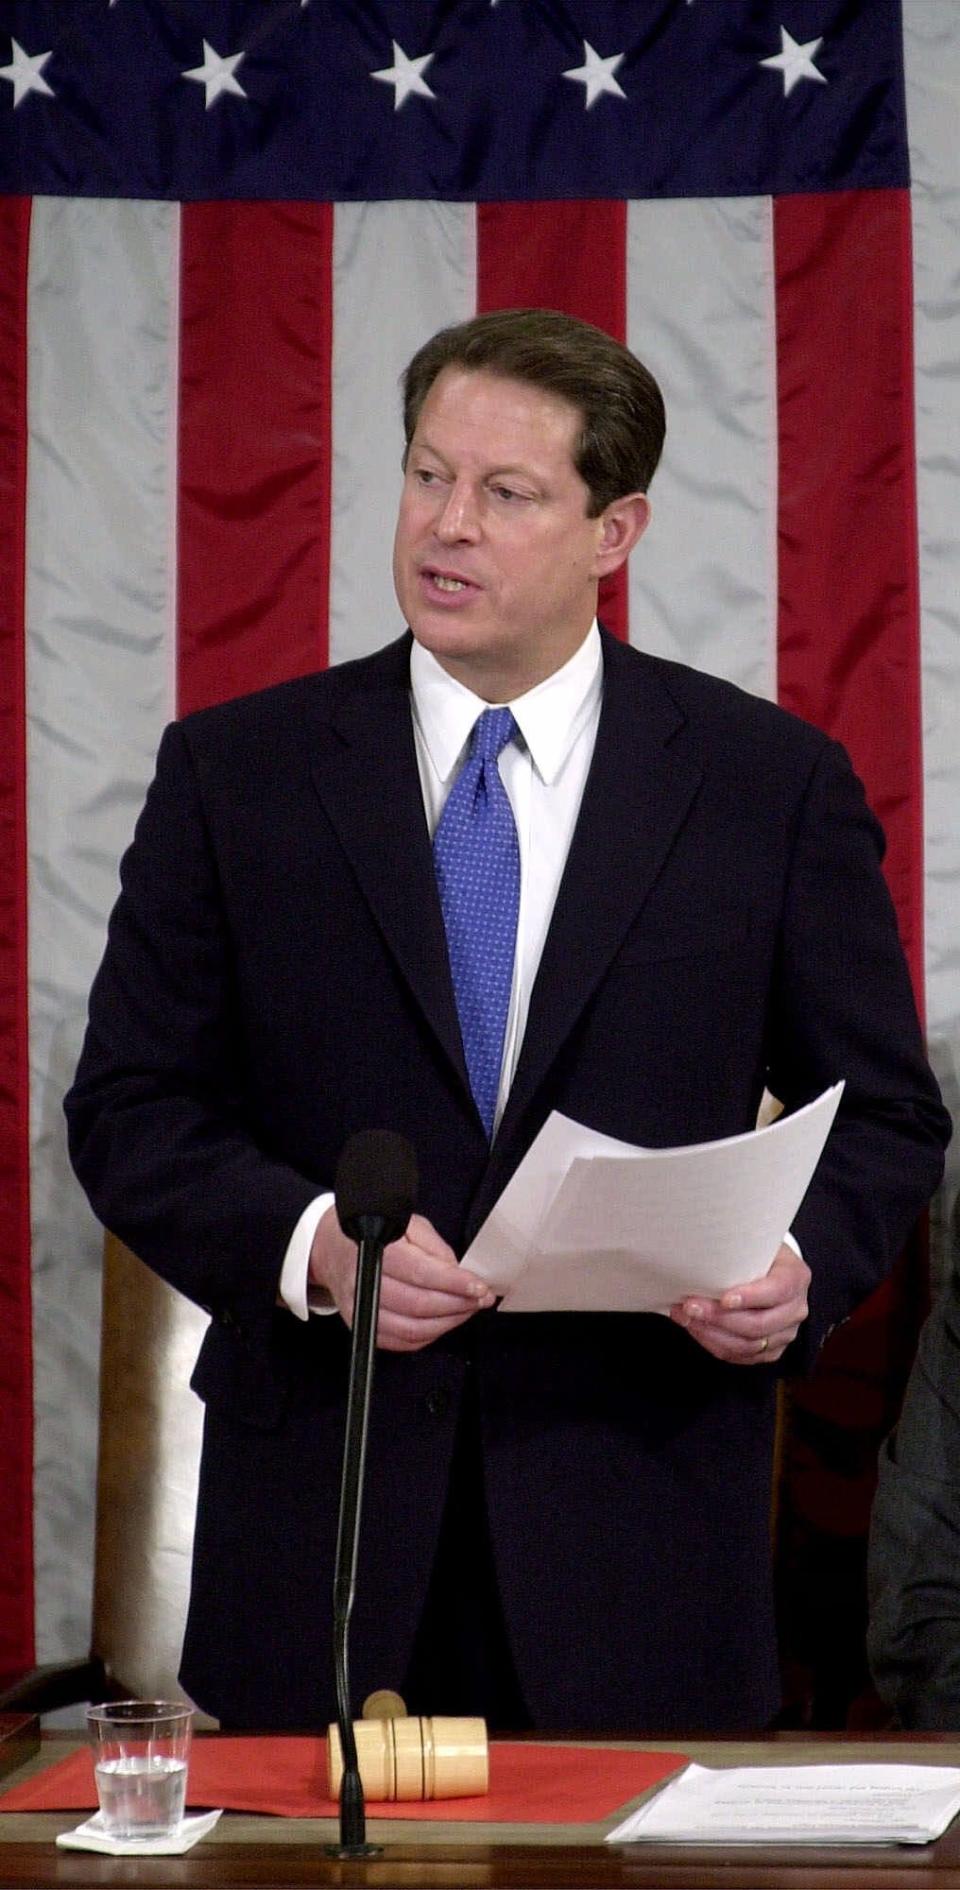 Vice President Al Gore reads the final results of the electoral vote during a joint session of Congress in Washington, D.C., on  Jan. 6, 2001.